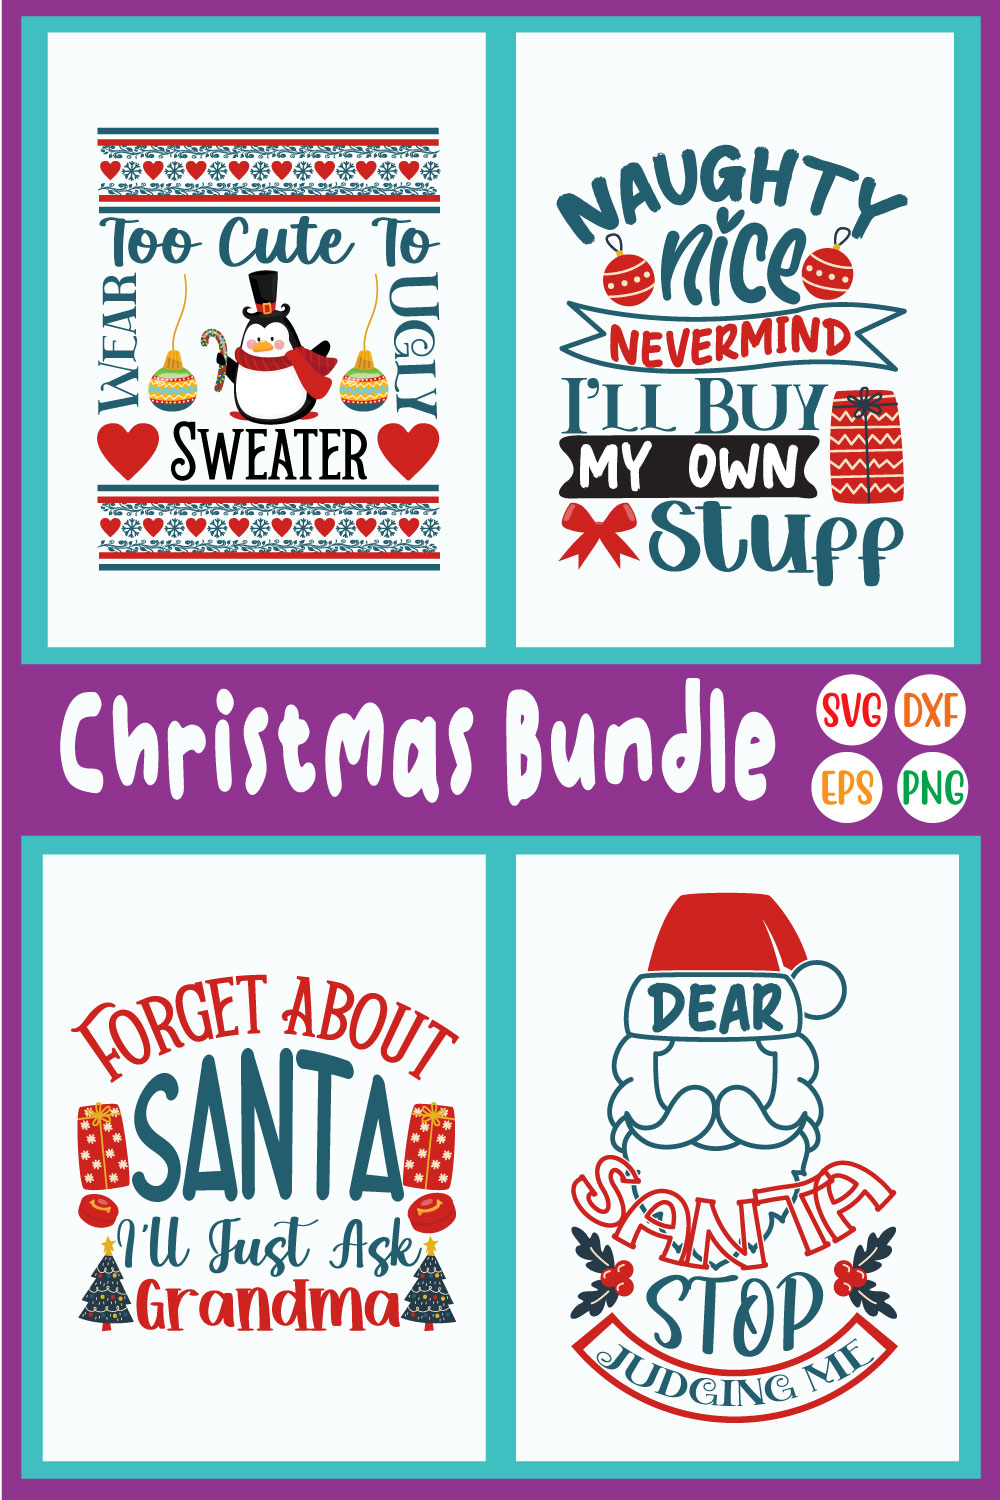 Christmas Svg funny quote vol23 pinterest preview image.